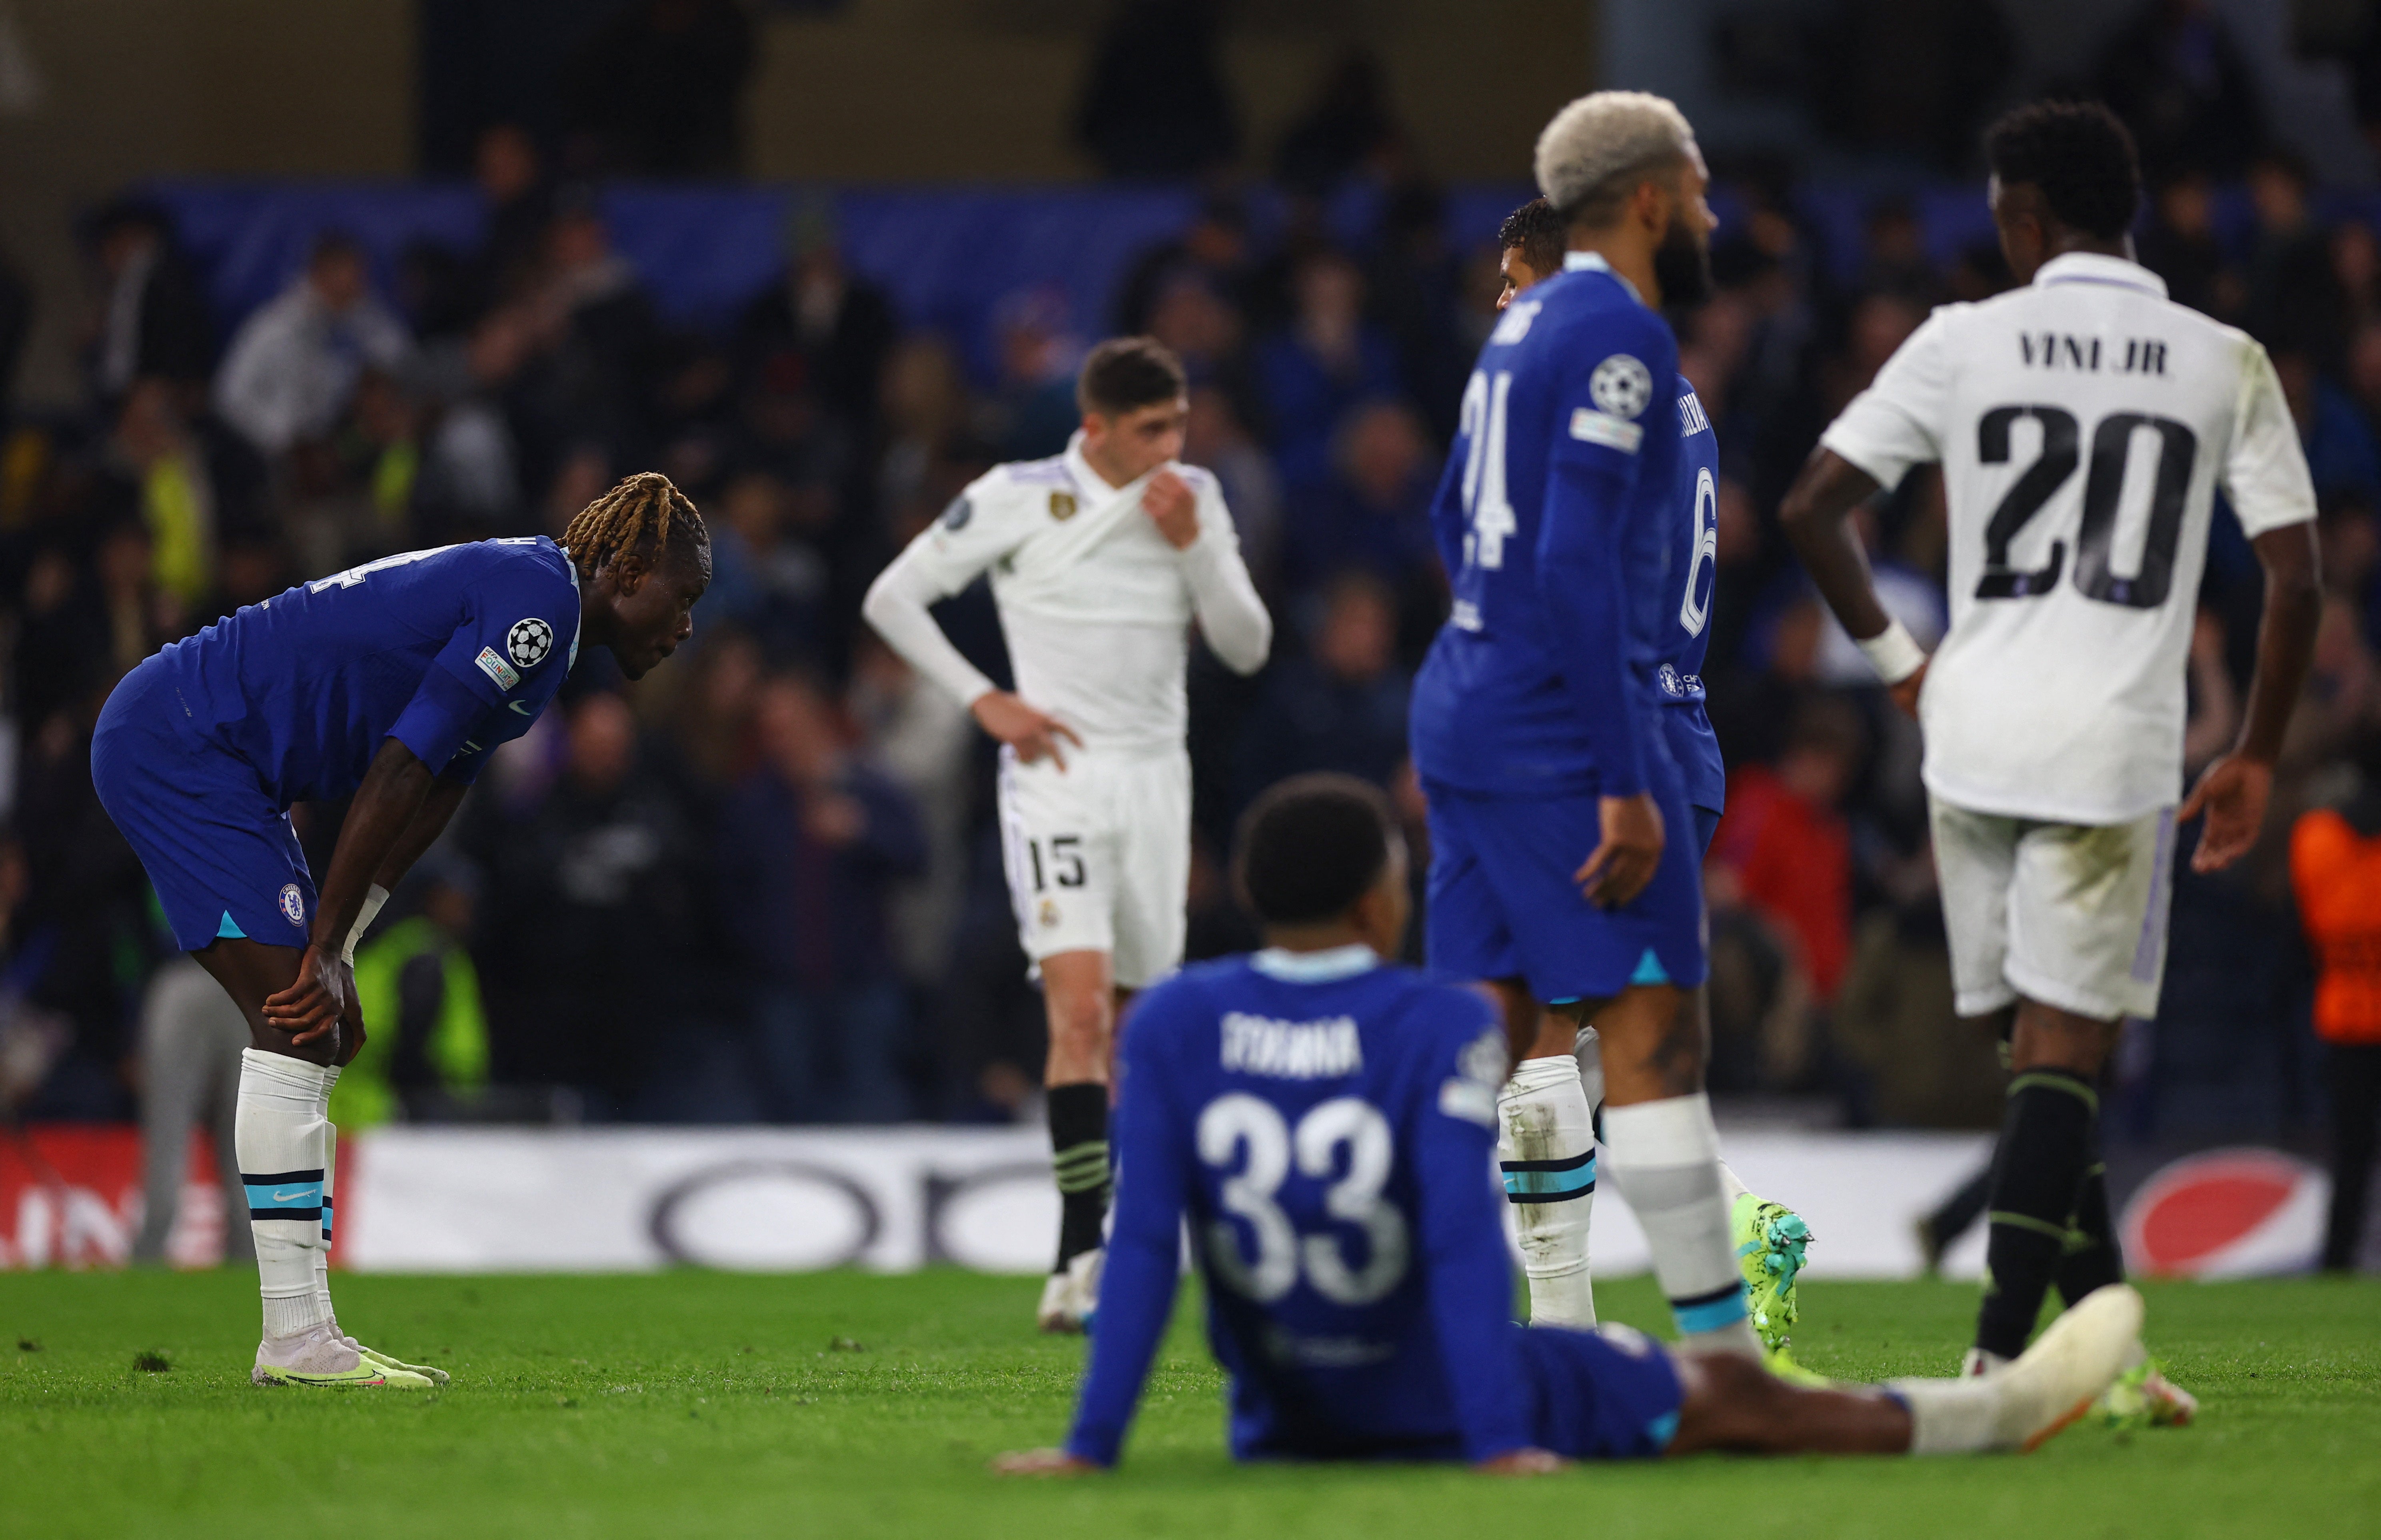 Real Madrid leave uncomfortable question hanging over baffled Chelsea